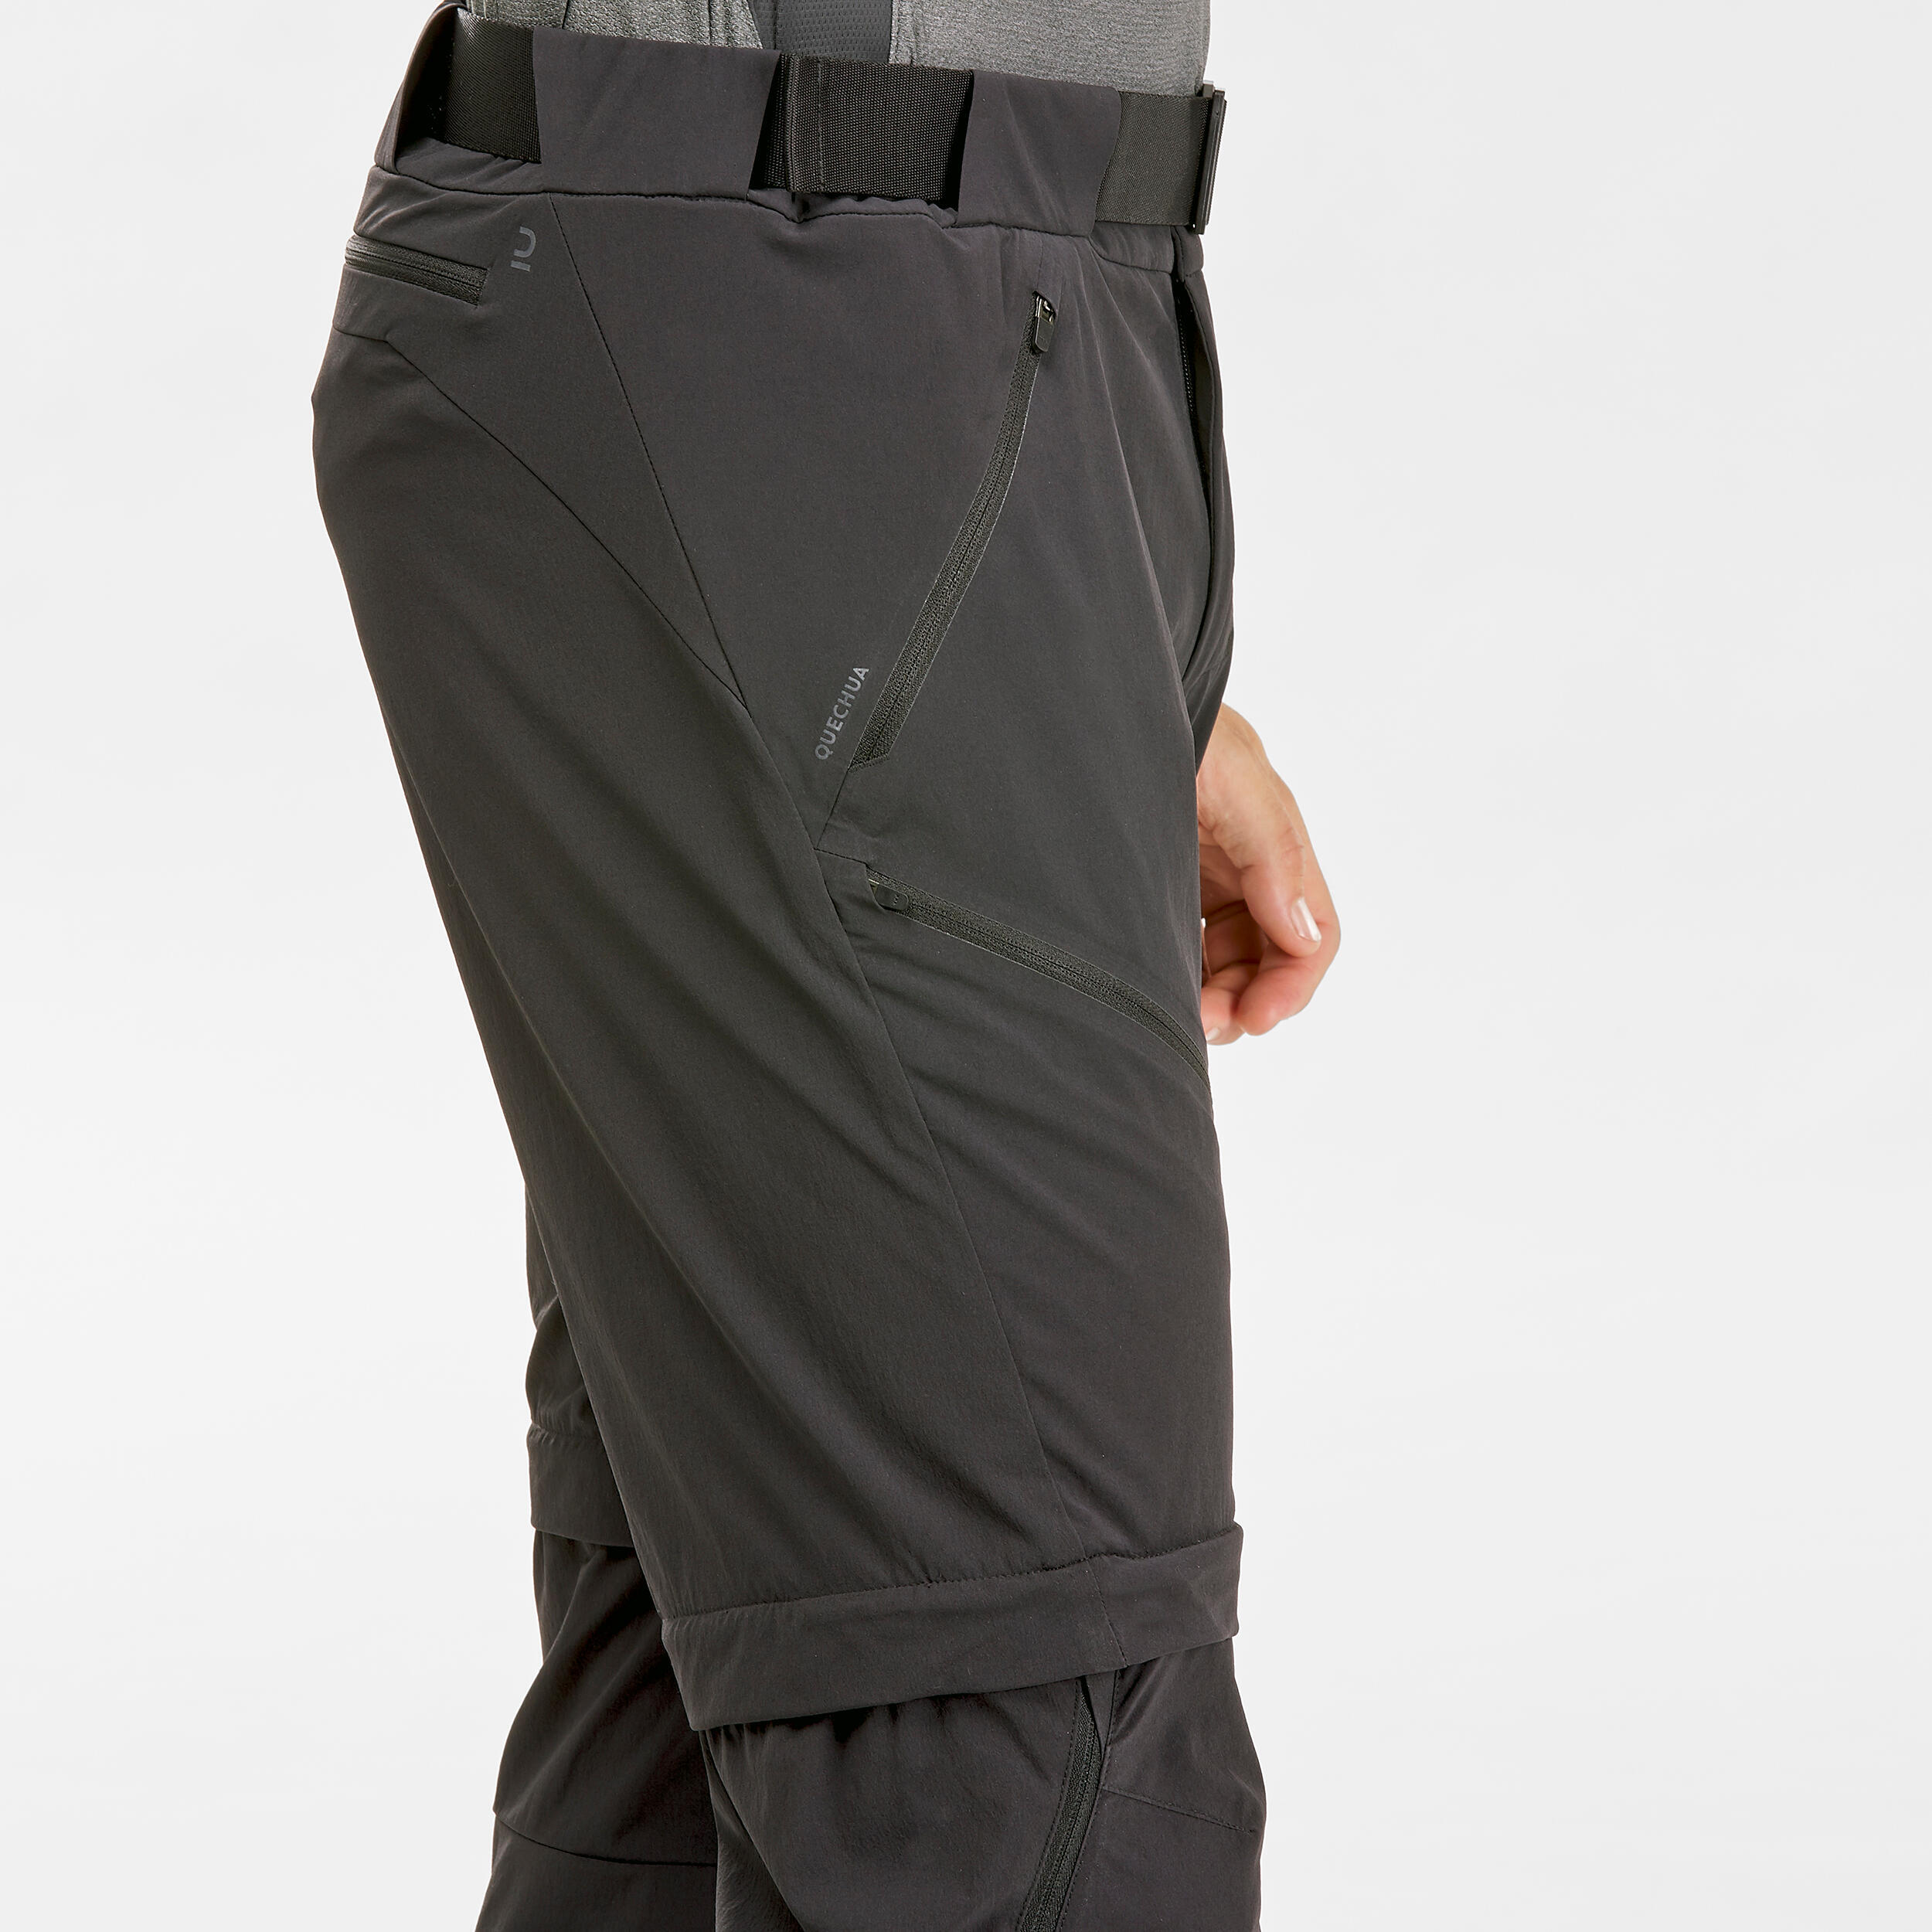 Men's Hiking Zip-Off Trousers MH550 7/9